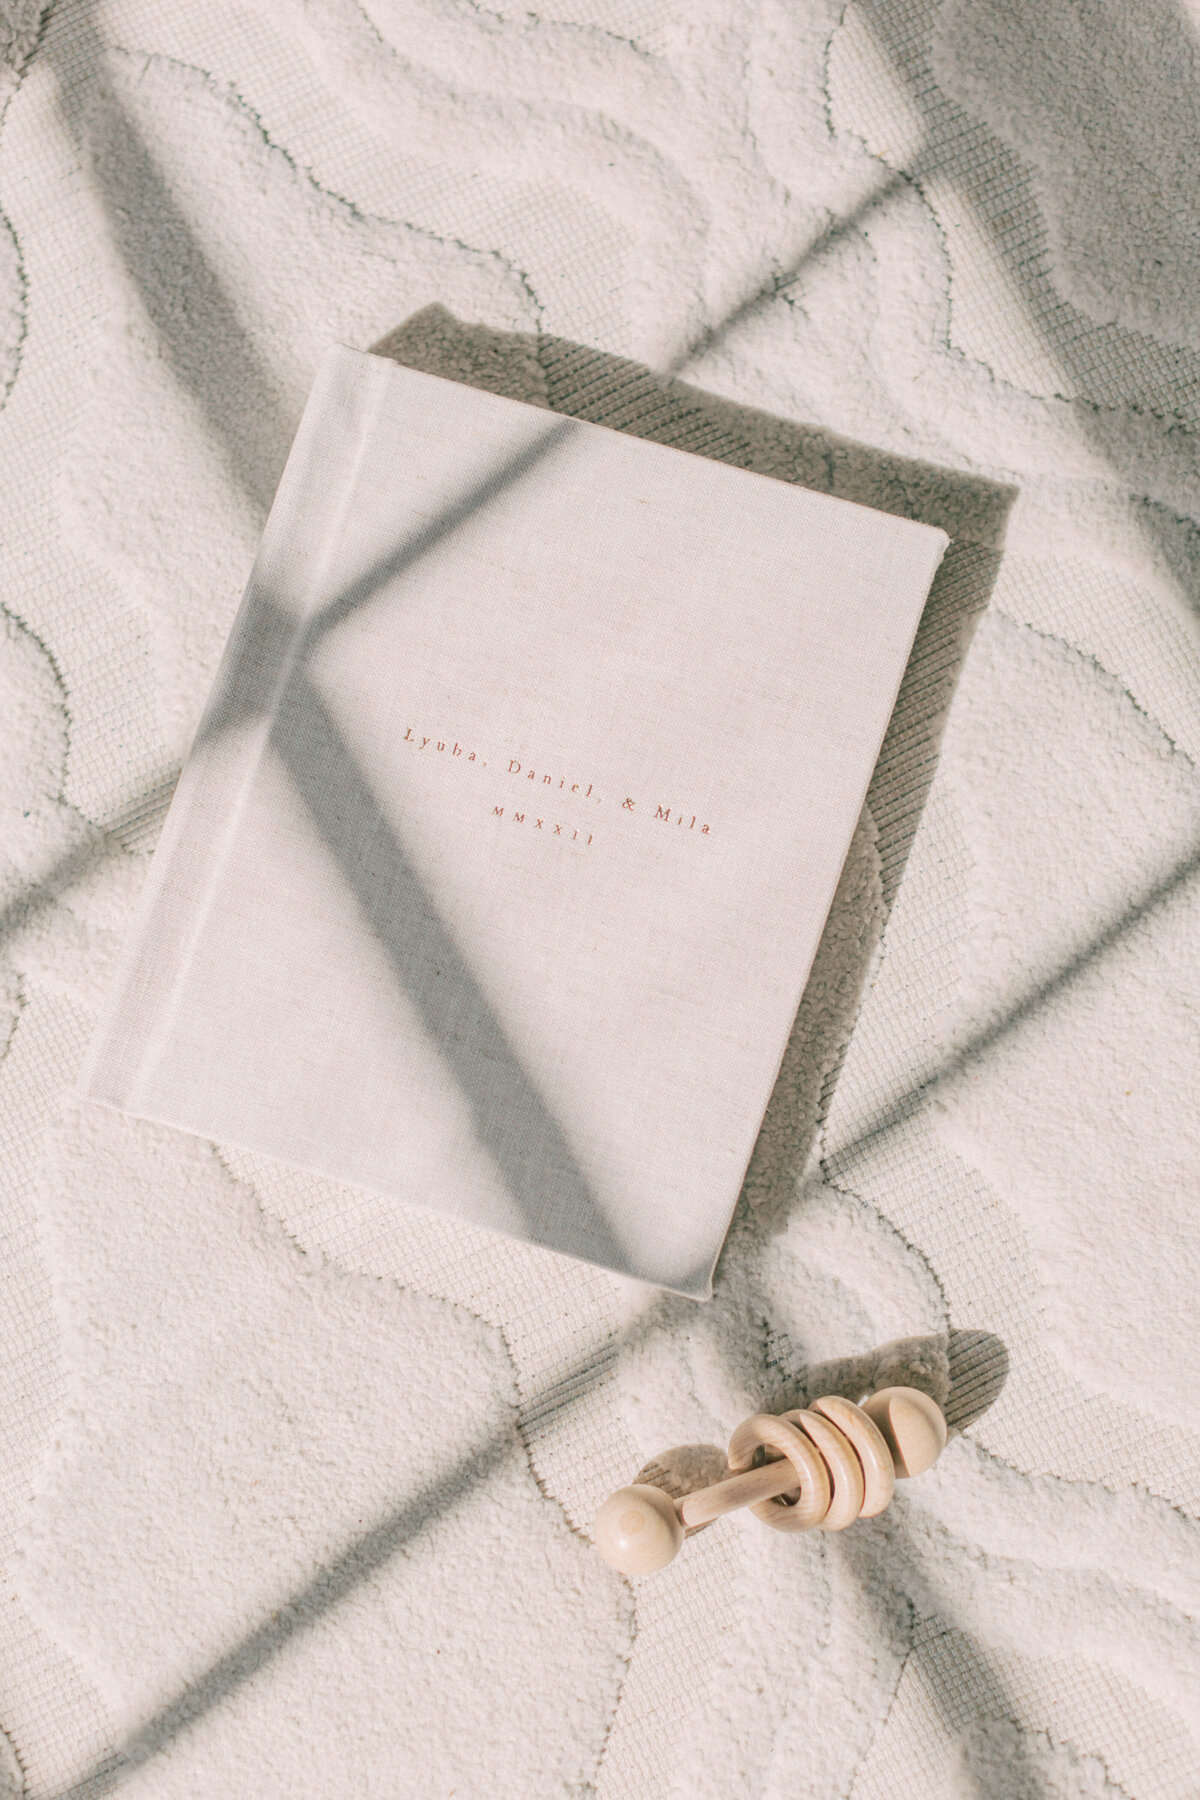 Natural linen album lying on the floor with a wooden rattle